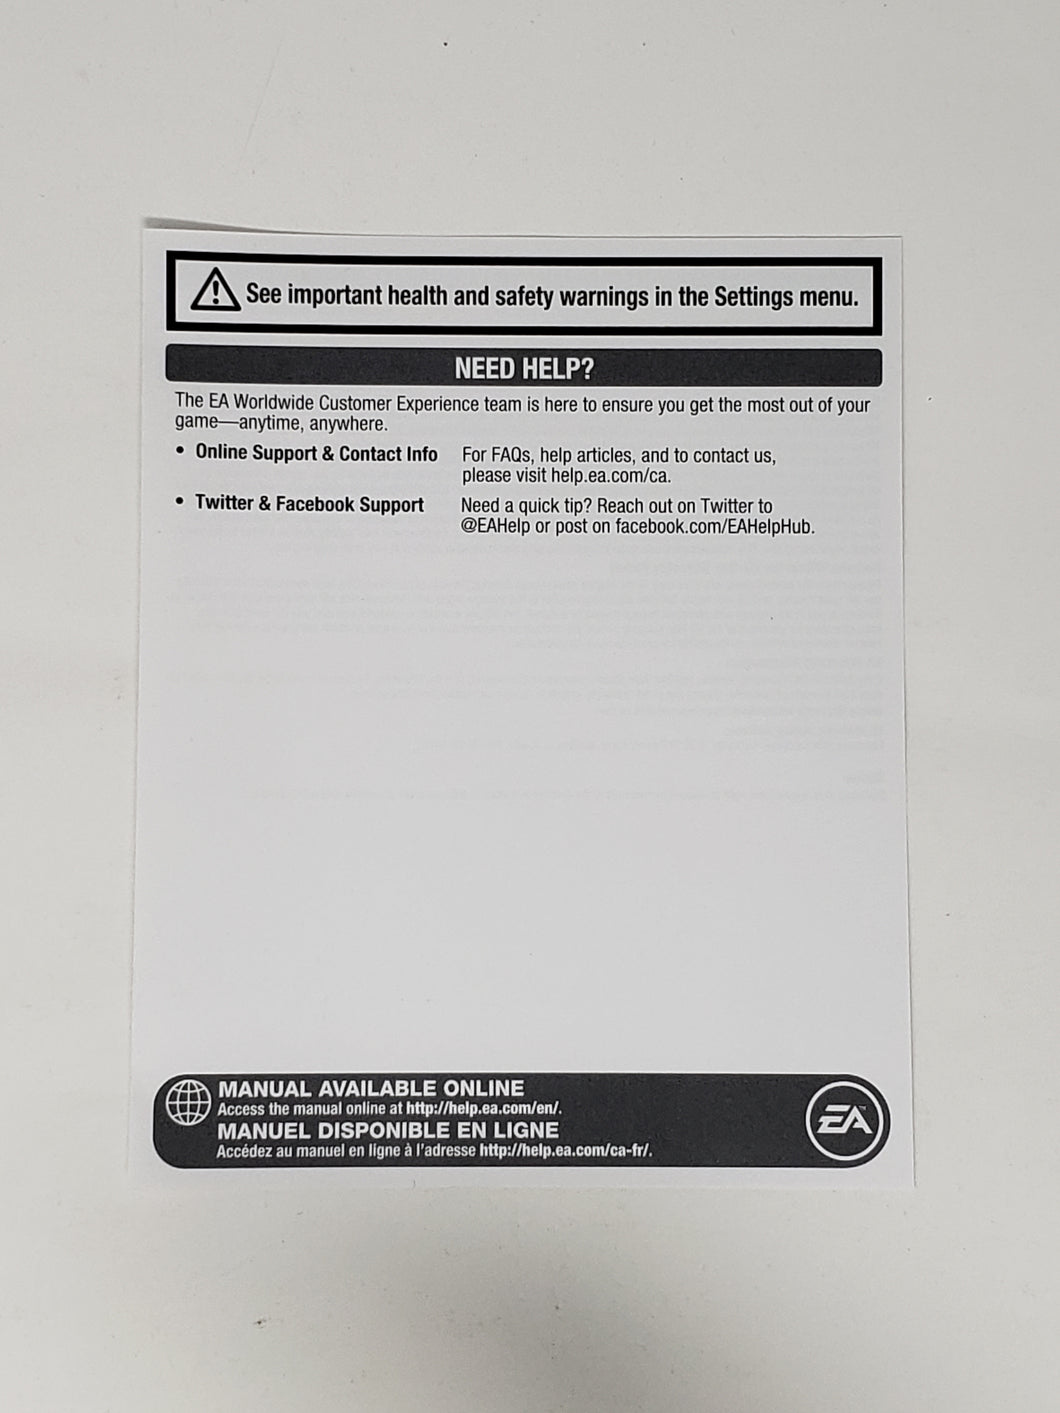 Health and Safety Manual [Insert] - Sony Playstation 4 | PS4